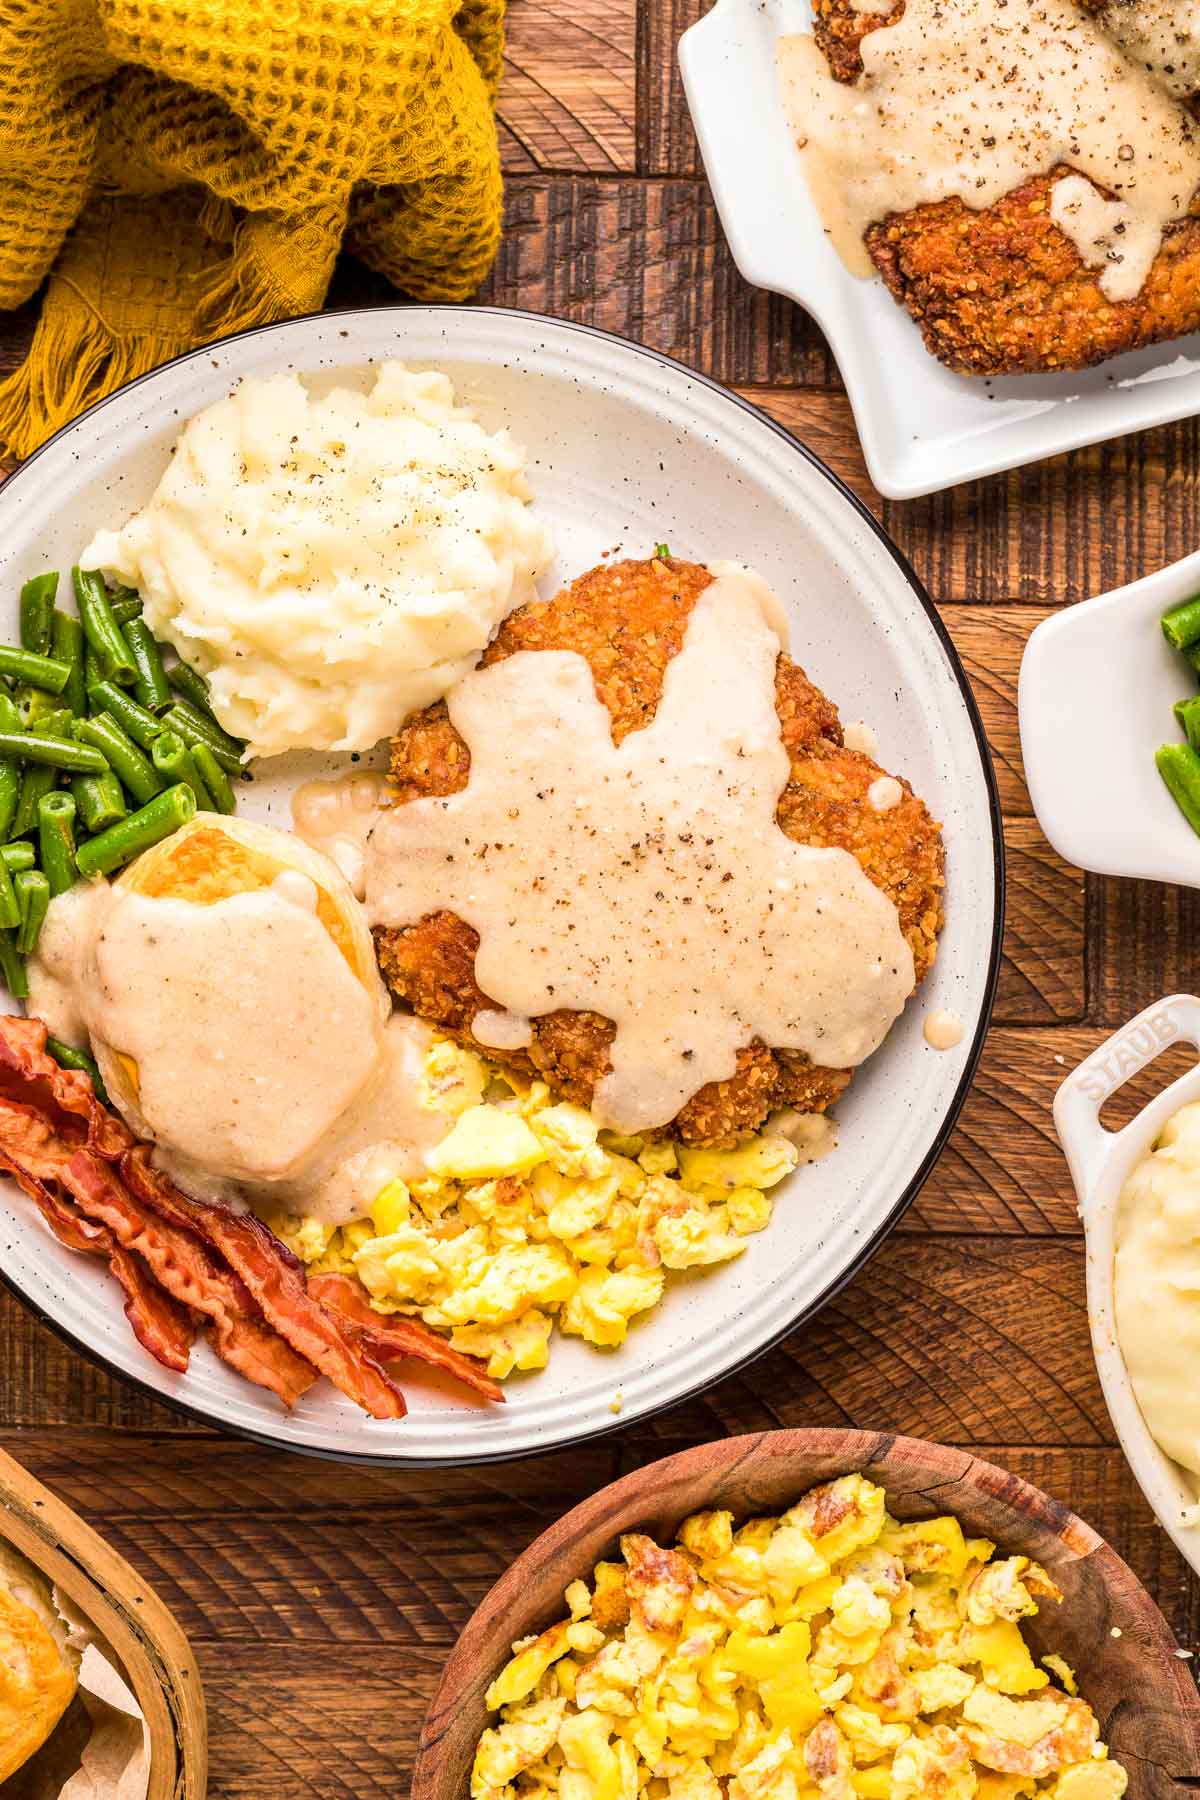 Overhead photo of a plate of country fried steak, bacon, eggs, and biscuits on a wooden table.